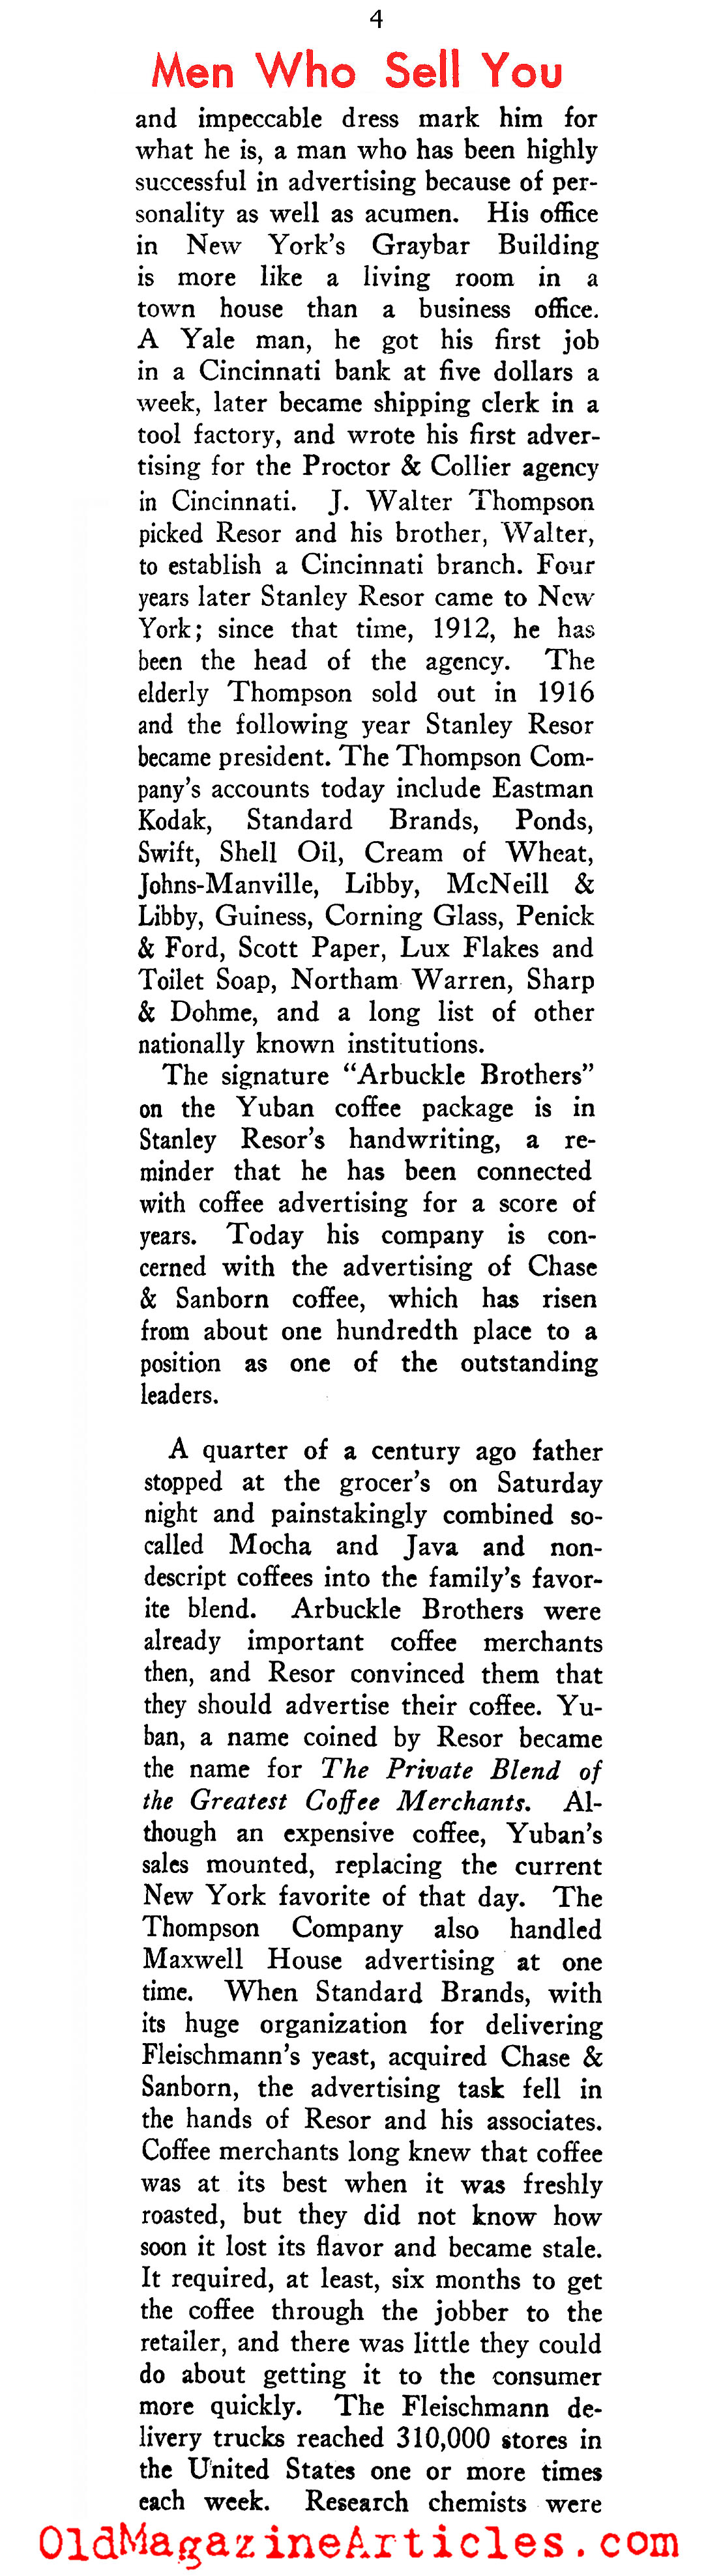 The Fathers of Modern Advertising (New Outlook Magazine, 1934)